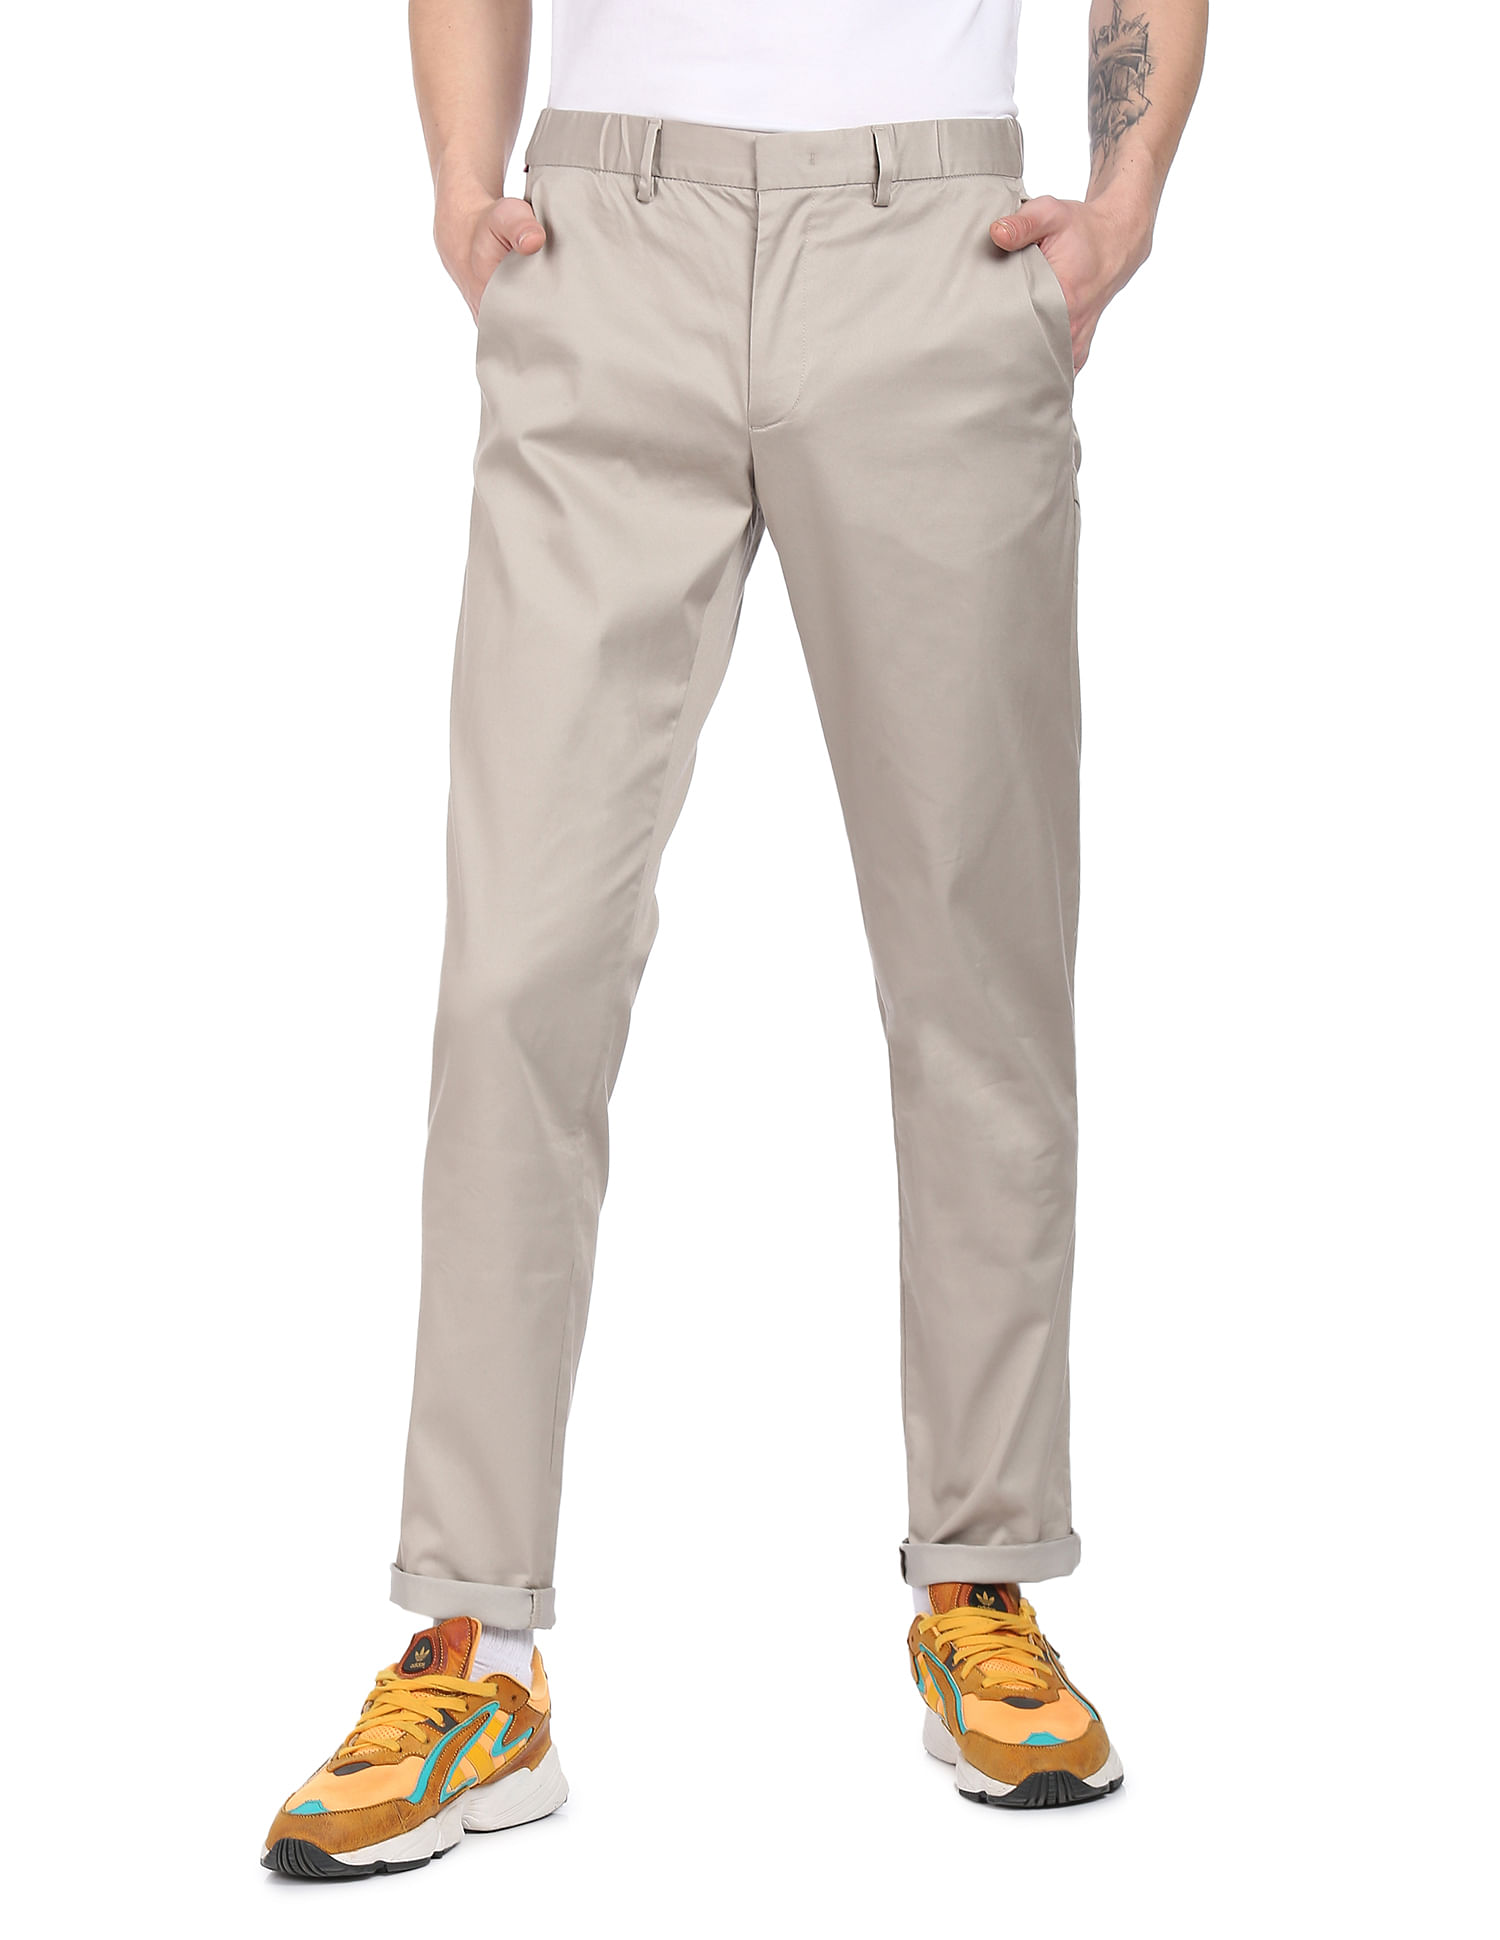 Chino Pants  131298  Stone from REFINERY  Refinery